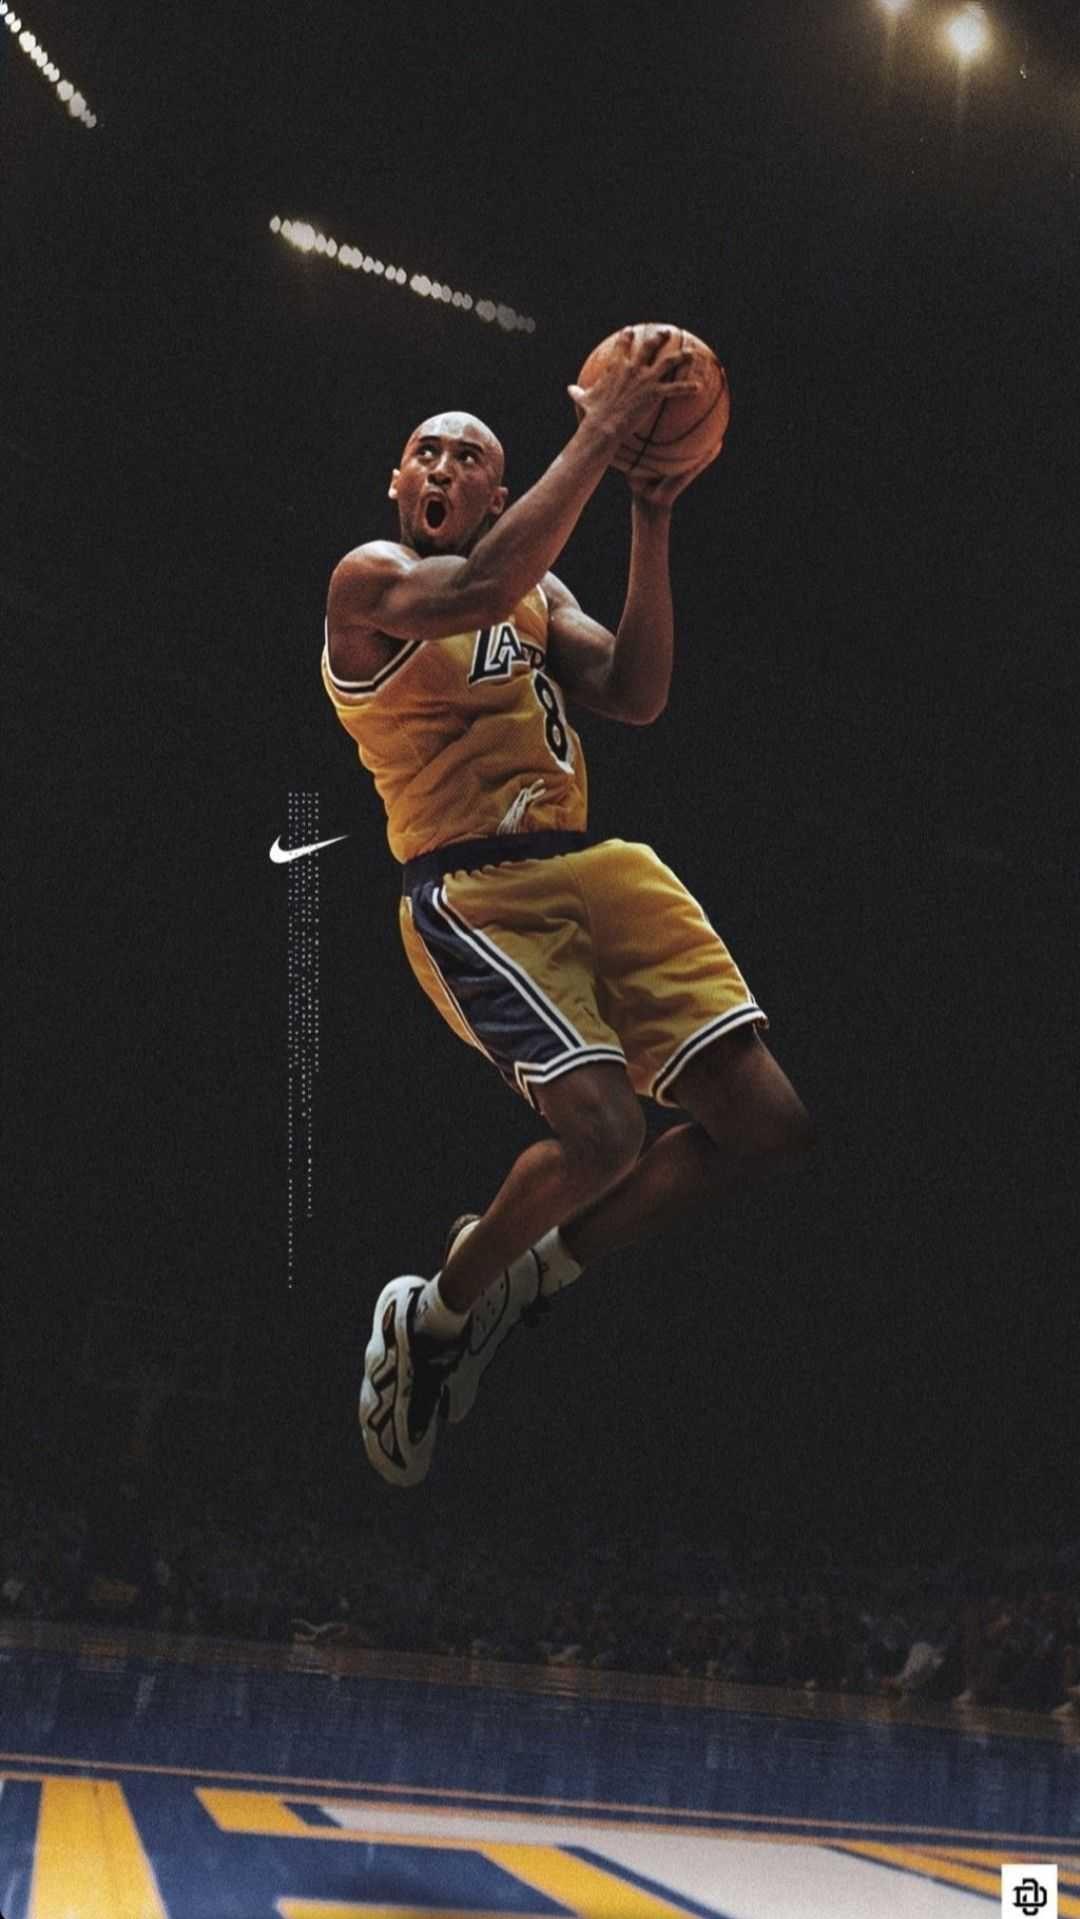 Kobe Bryant Wallpaper Discover more background Basketball cool